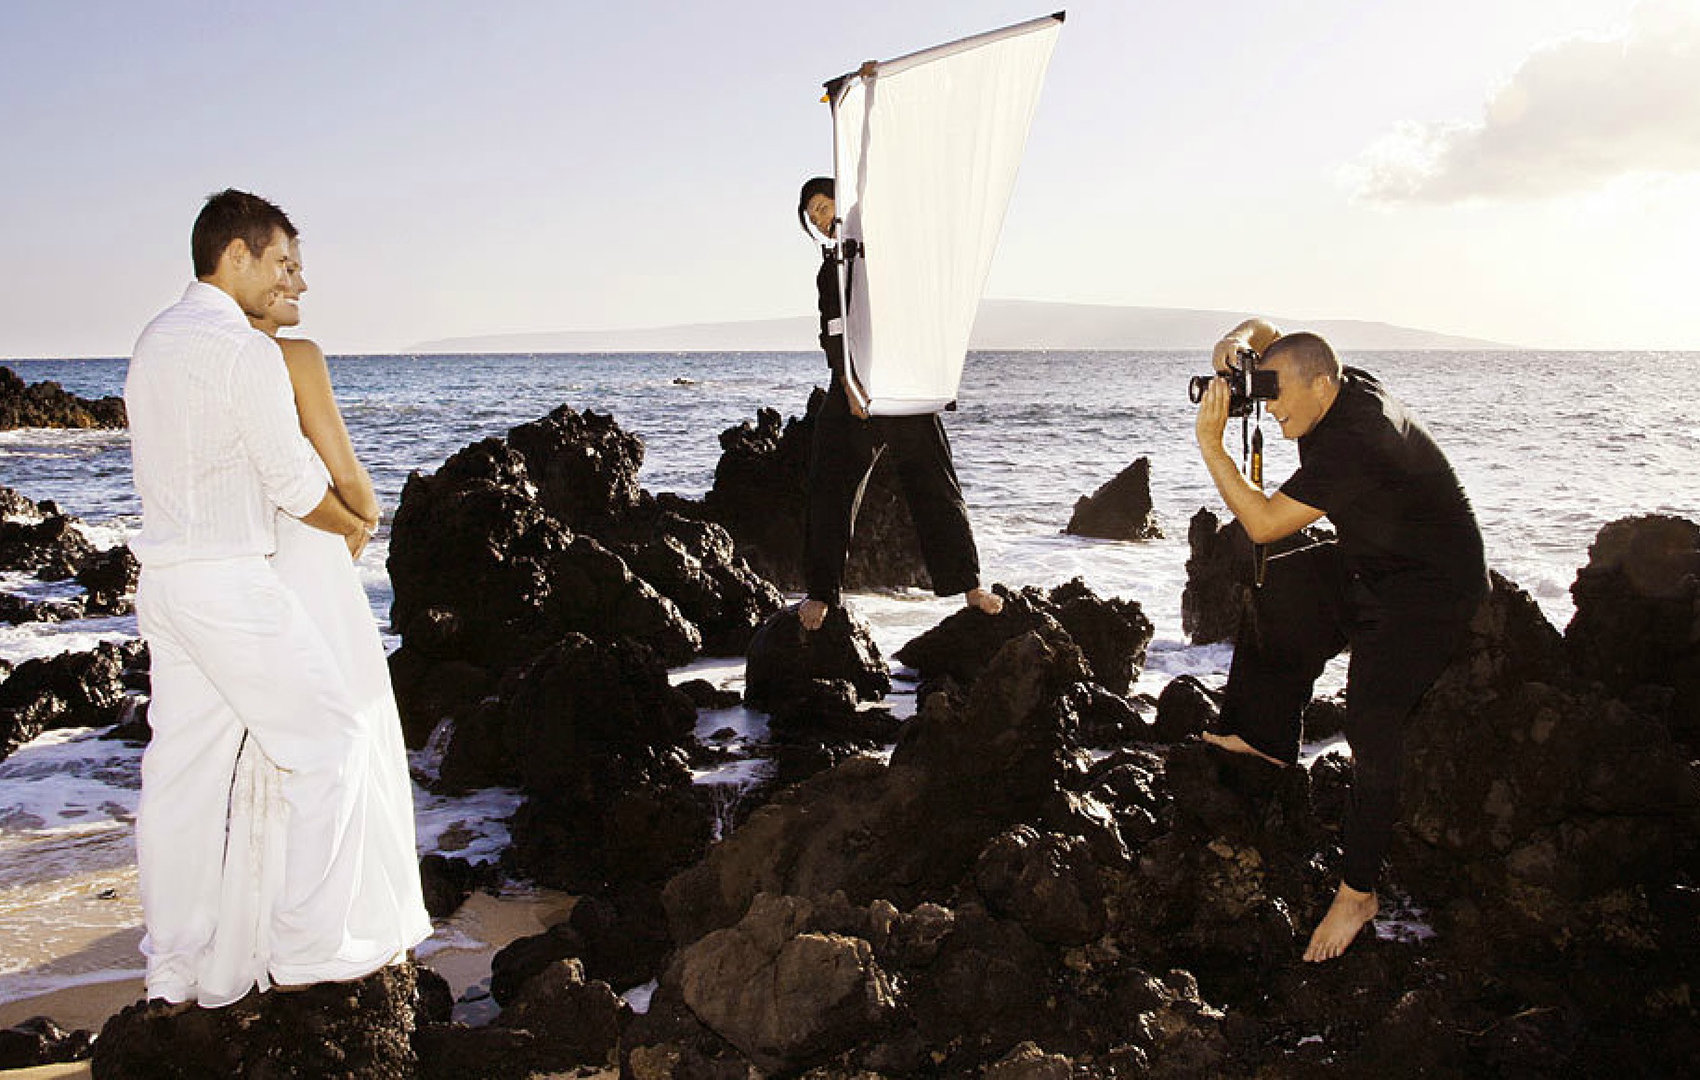 Behind the scenes photographers on Maui